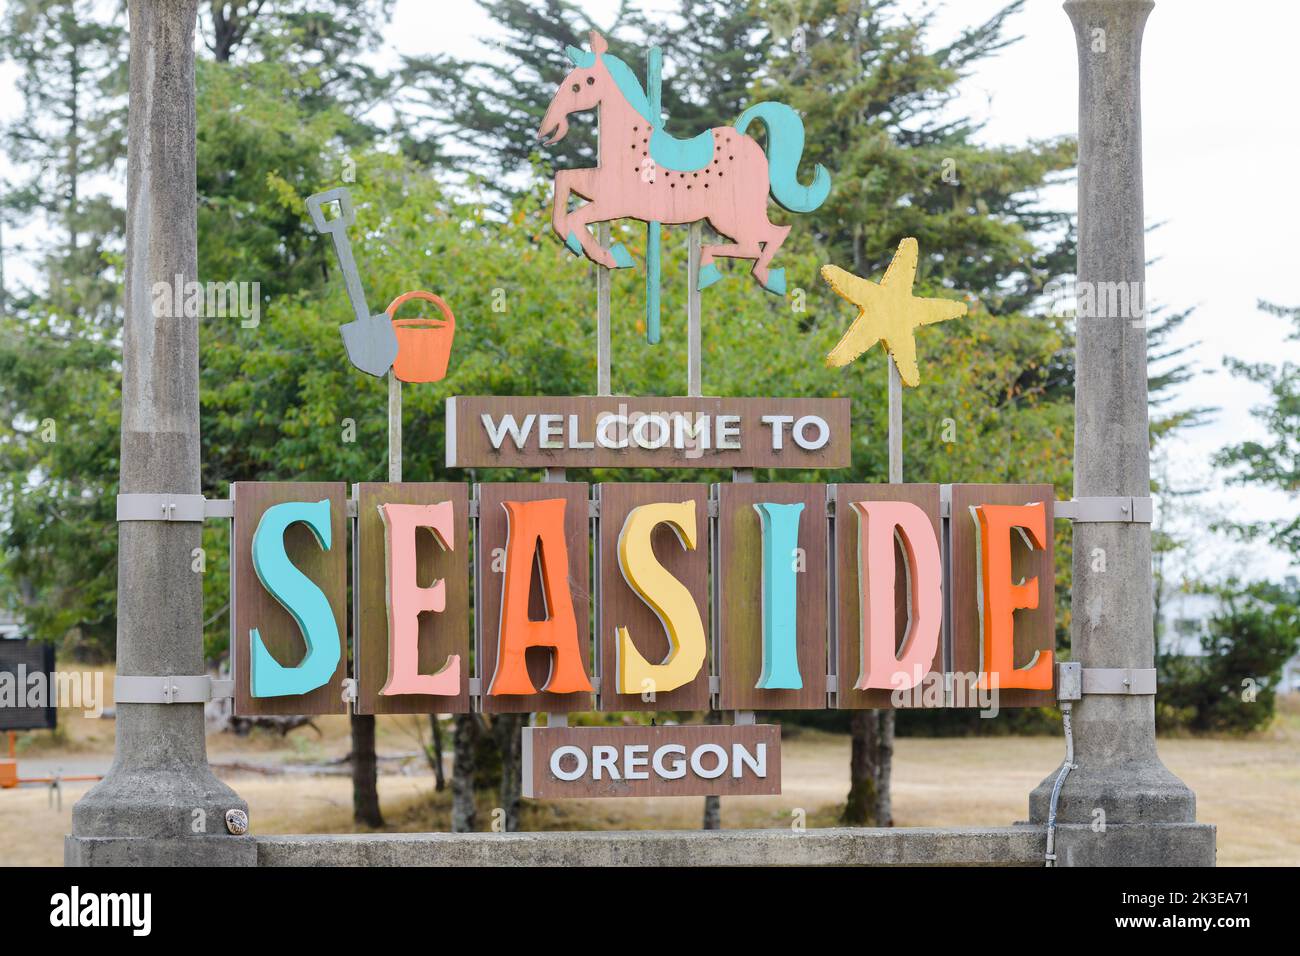 Seaside, OR, USA - September 14, 2022; Welcome to Seaside Oregon in the caostal city with seashore items Stock Photo